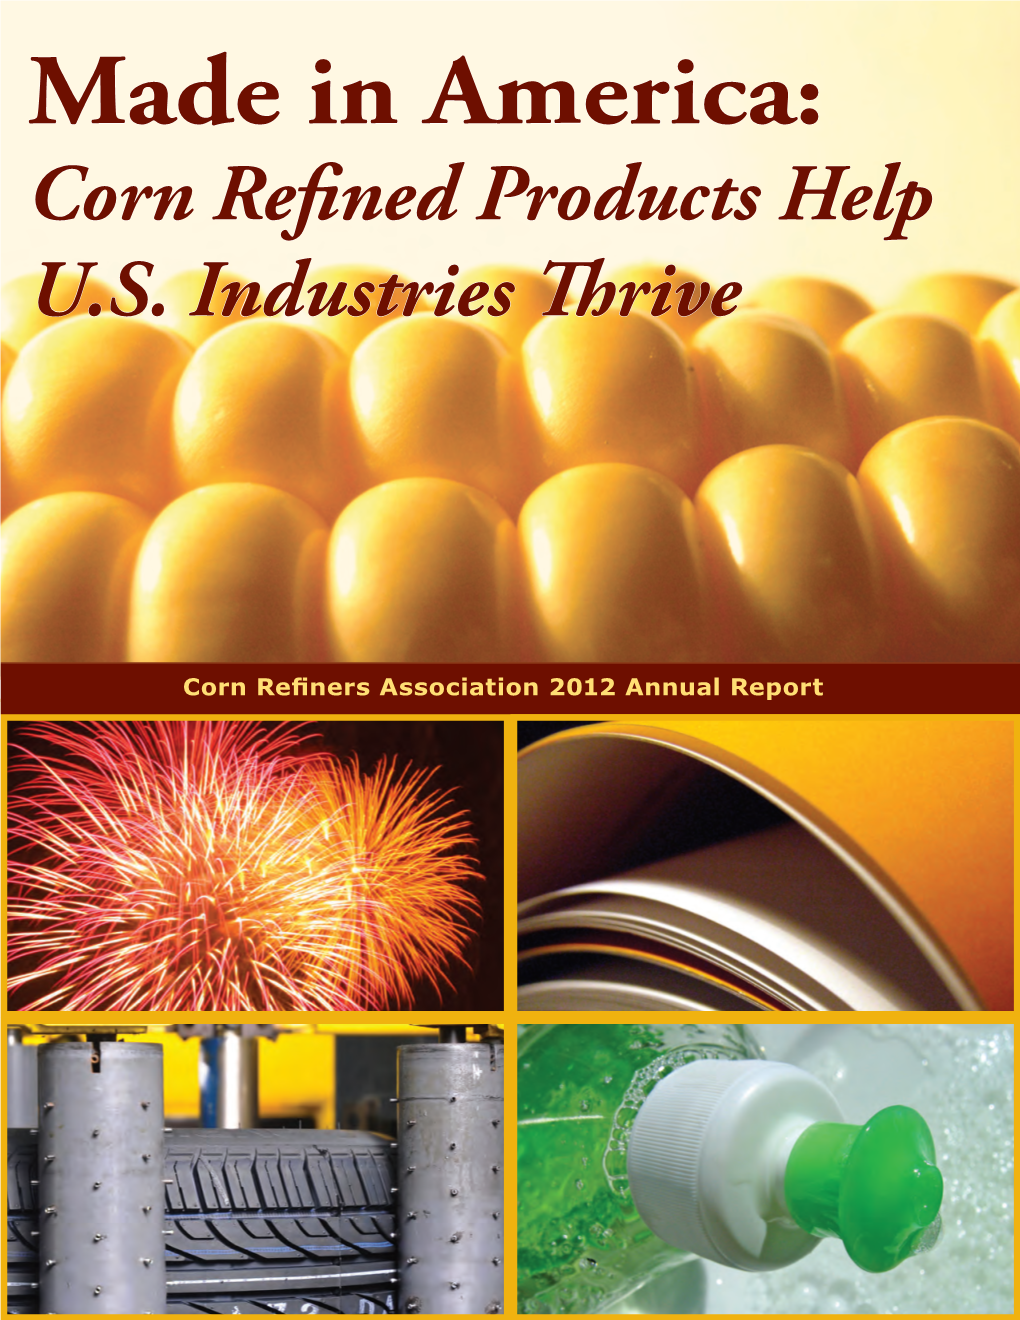 Made in America: Corn Refined Products Help U.S